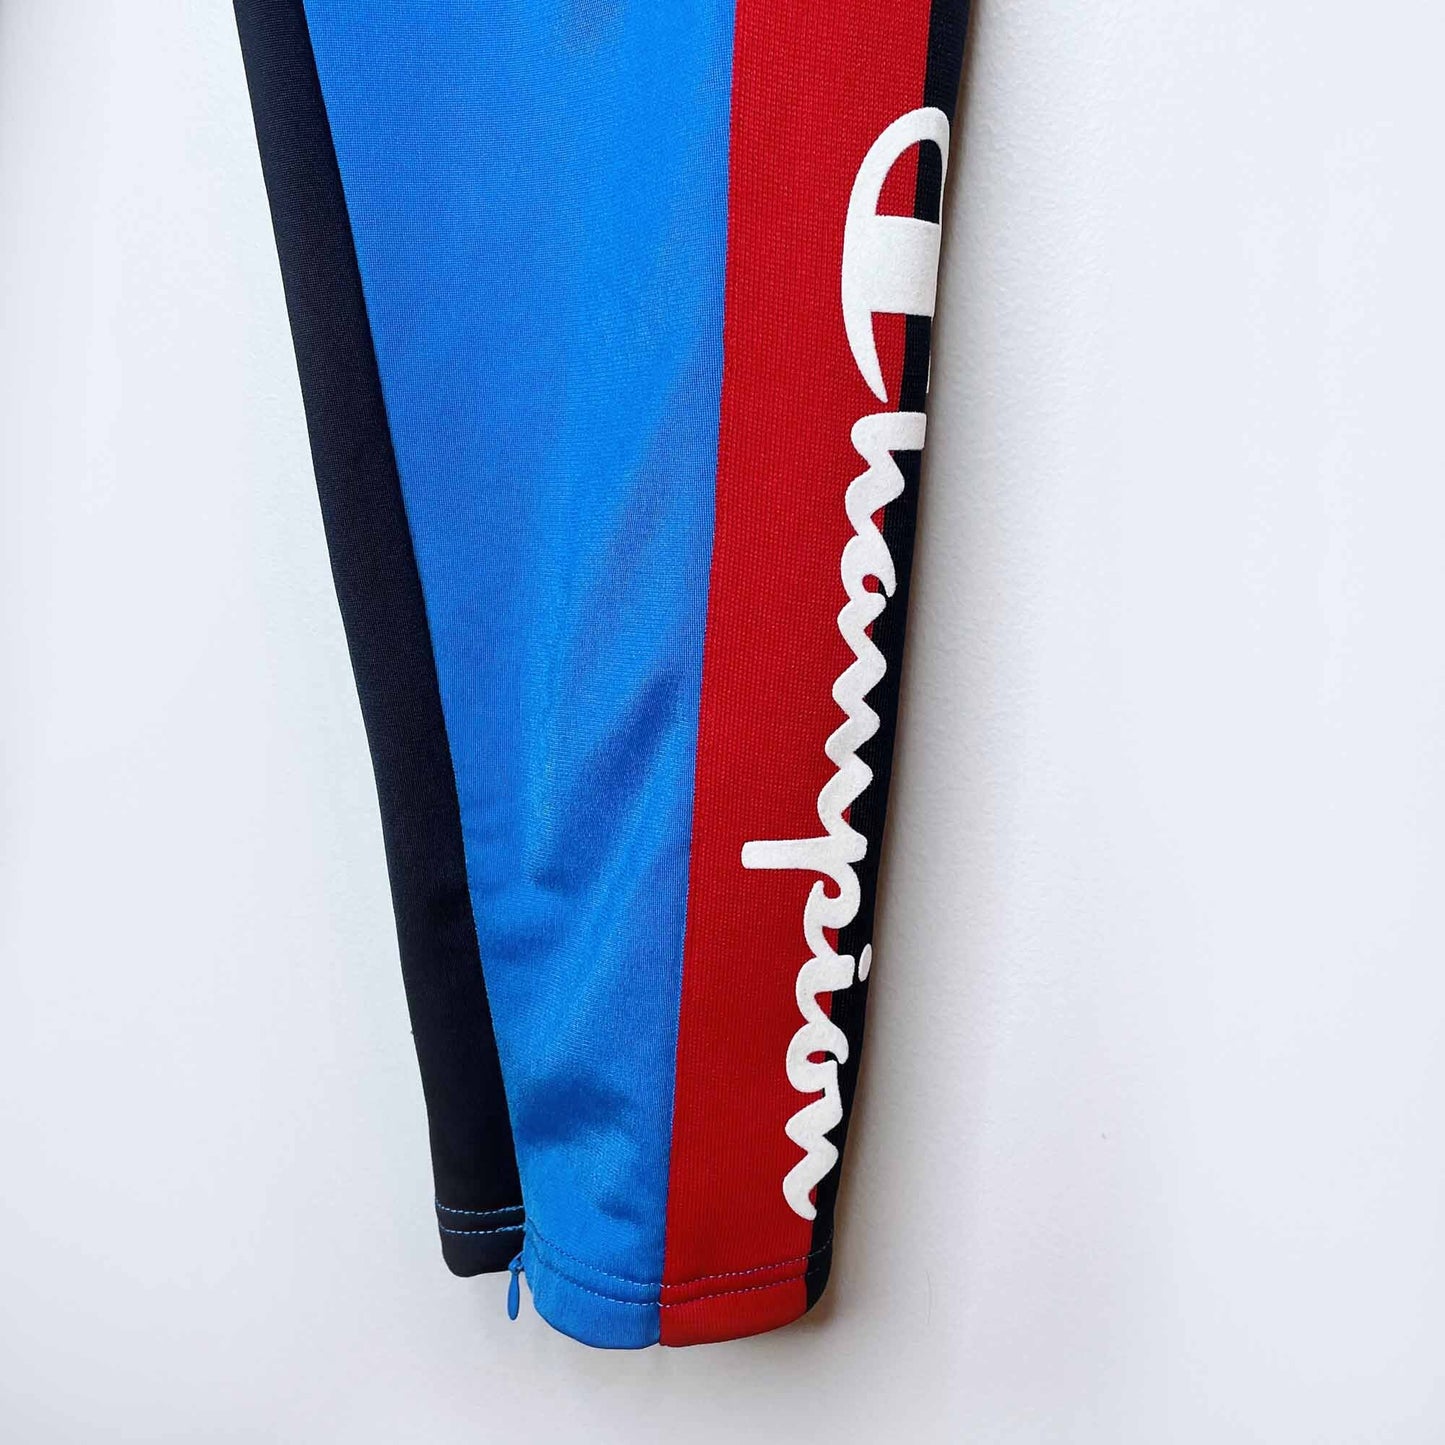 Champion tricot blue jay track pants - size Small